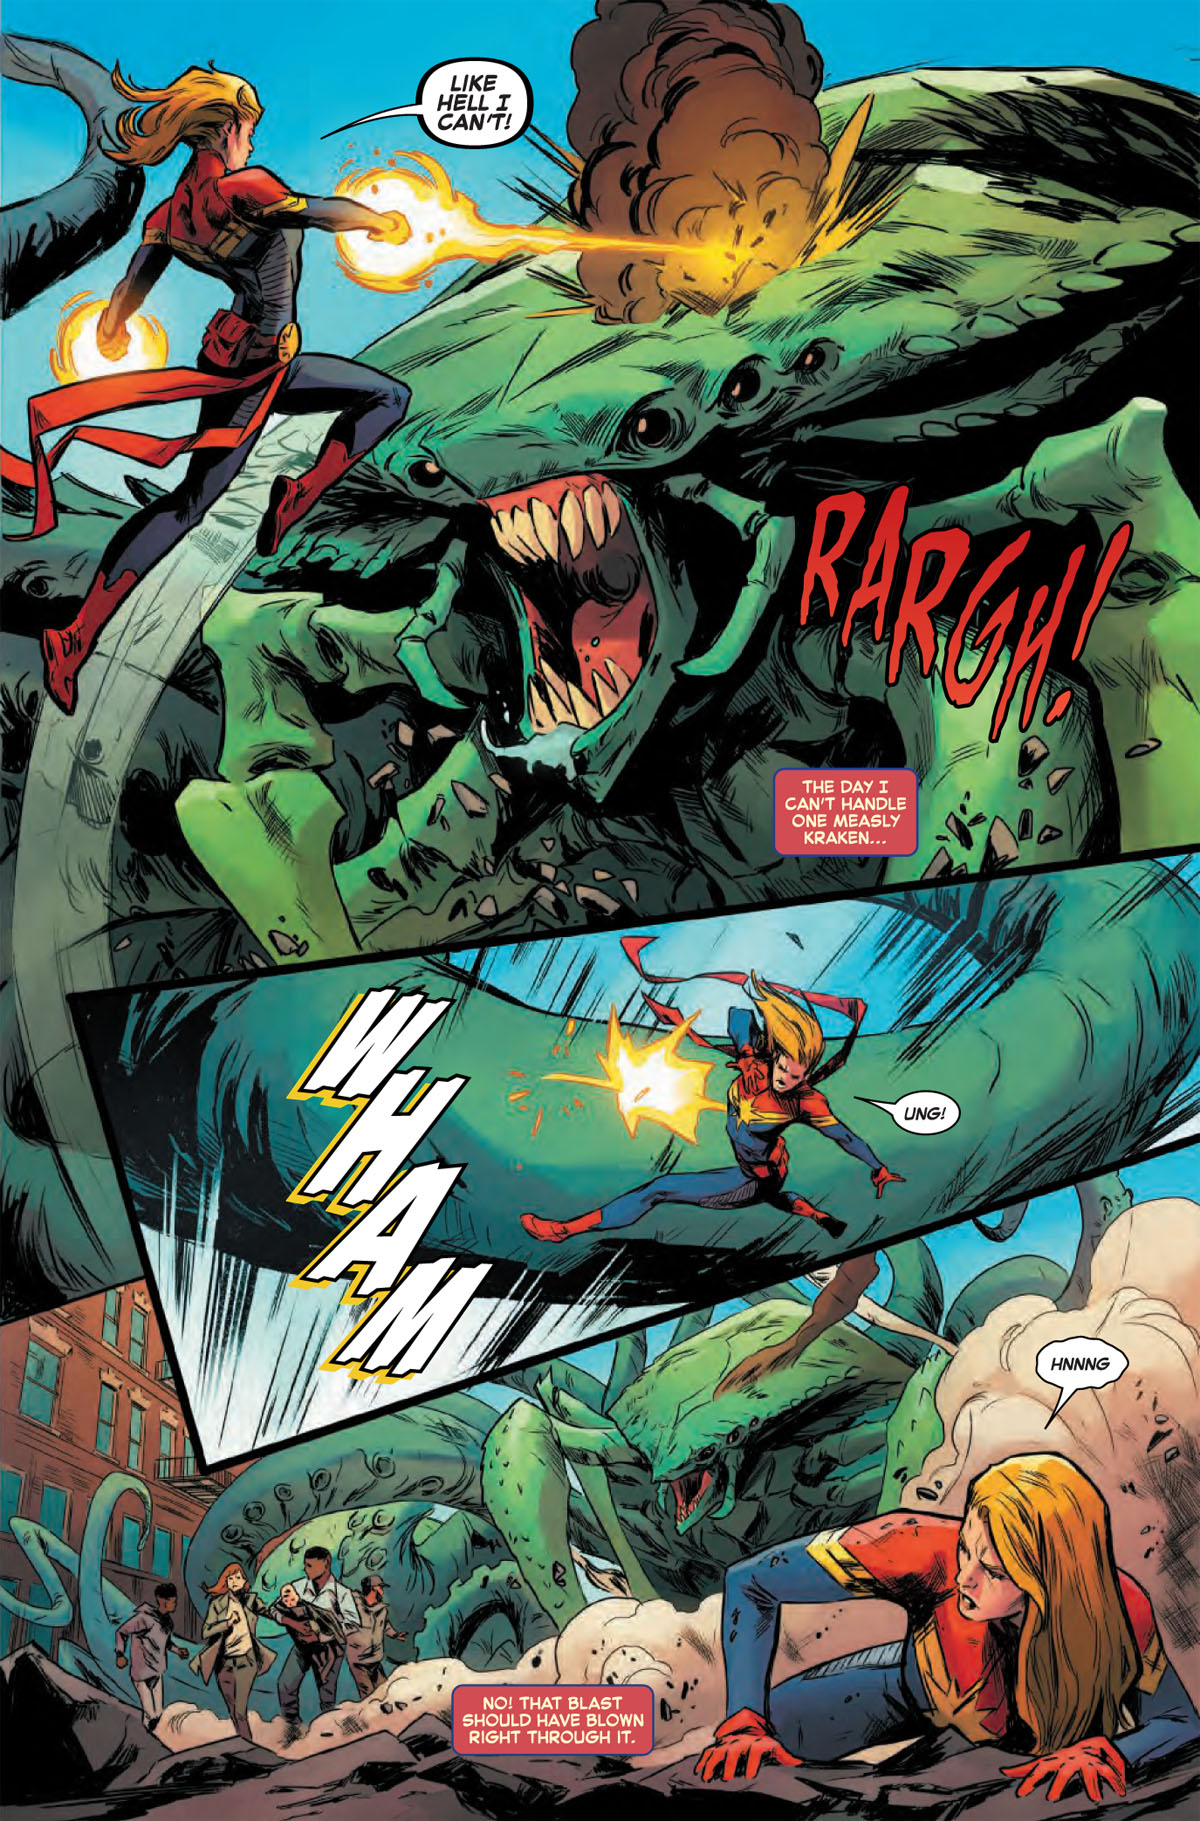 Captain Marvel #9 page 4